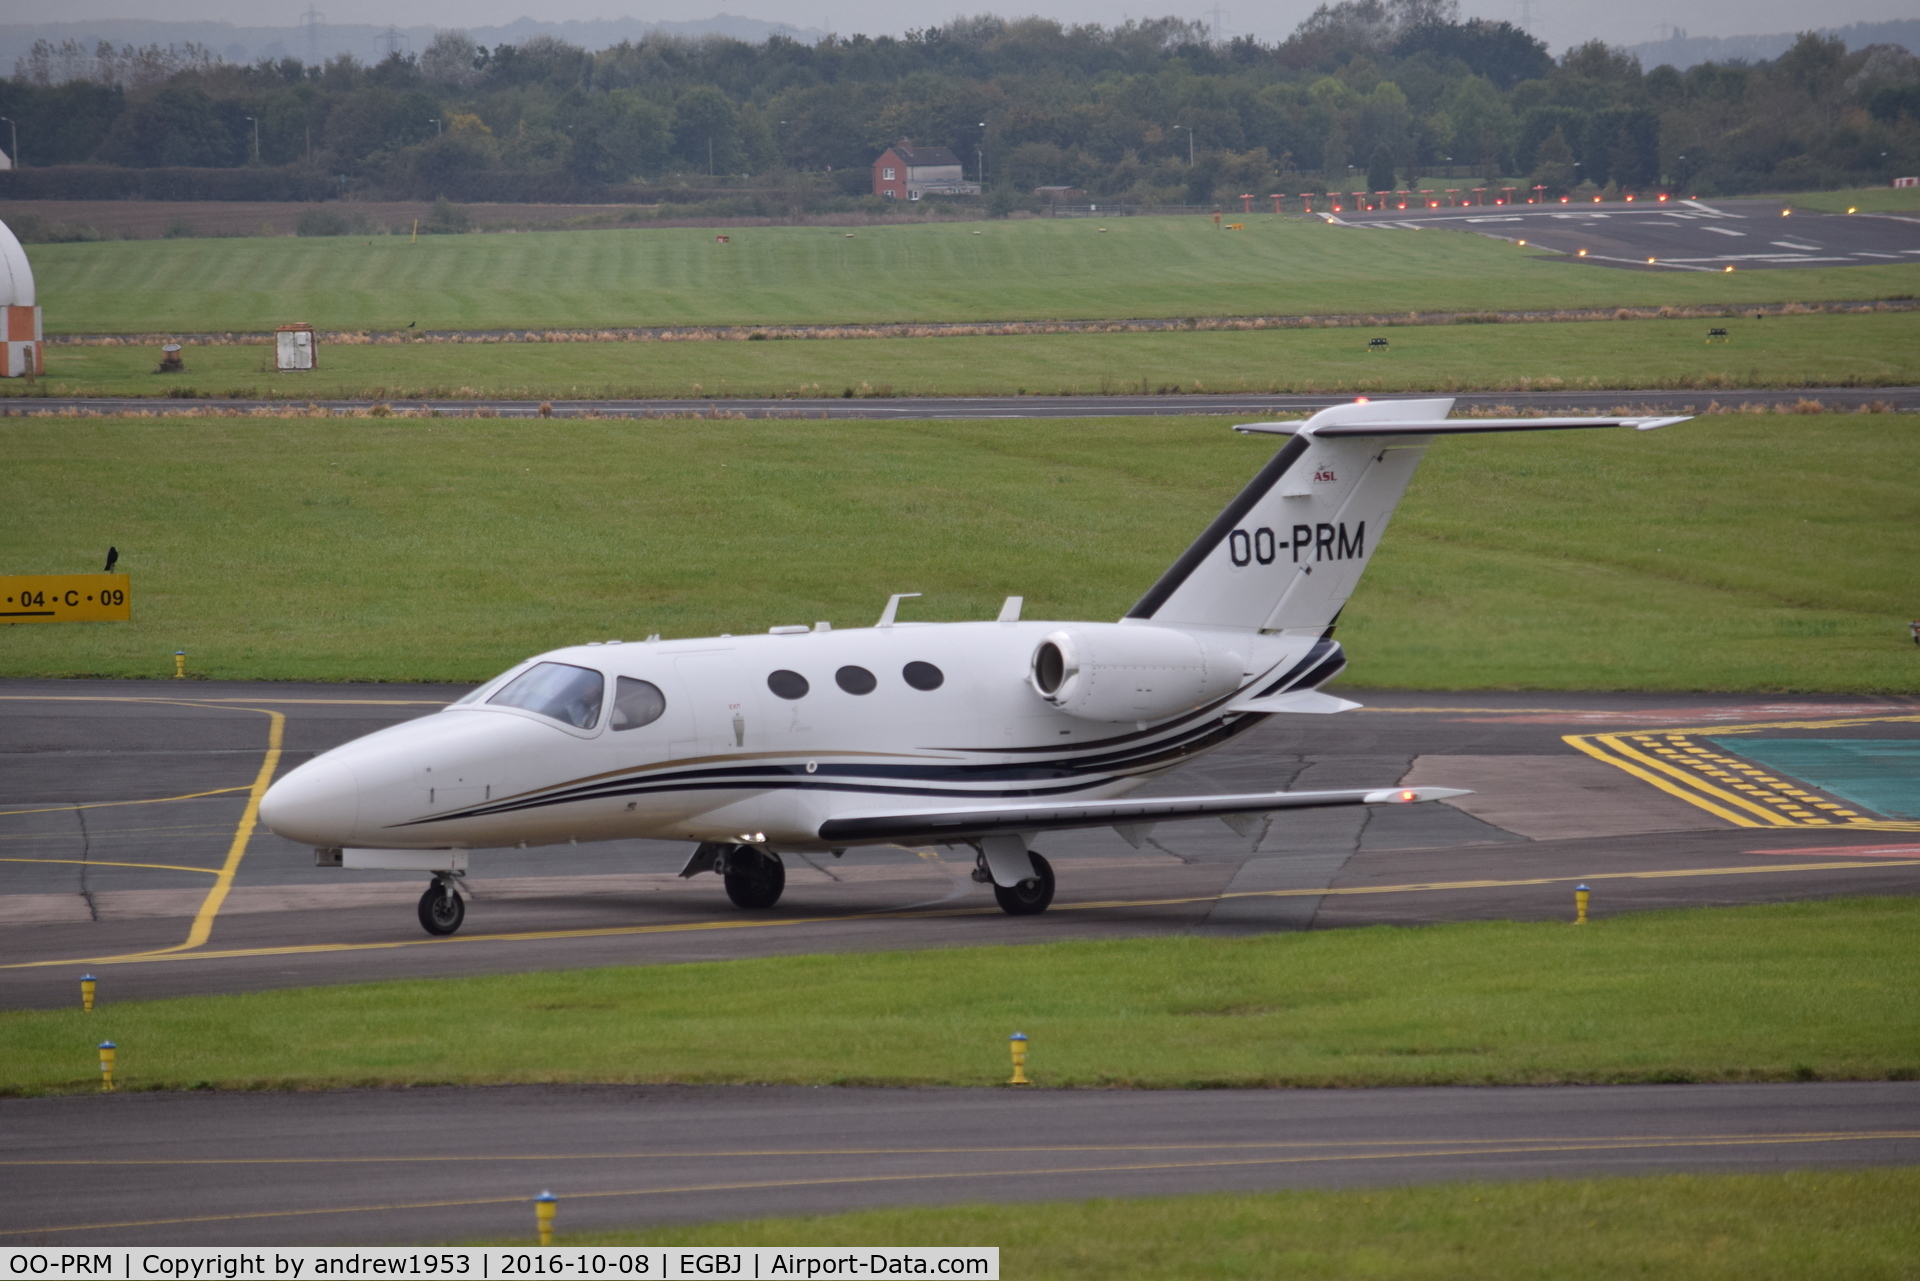 OO-PRM, 2008 Cessna 510 Citation Mustang Citation Mustang C/N 510-0125, OO-PRM at Gloucestershire Airport.